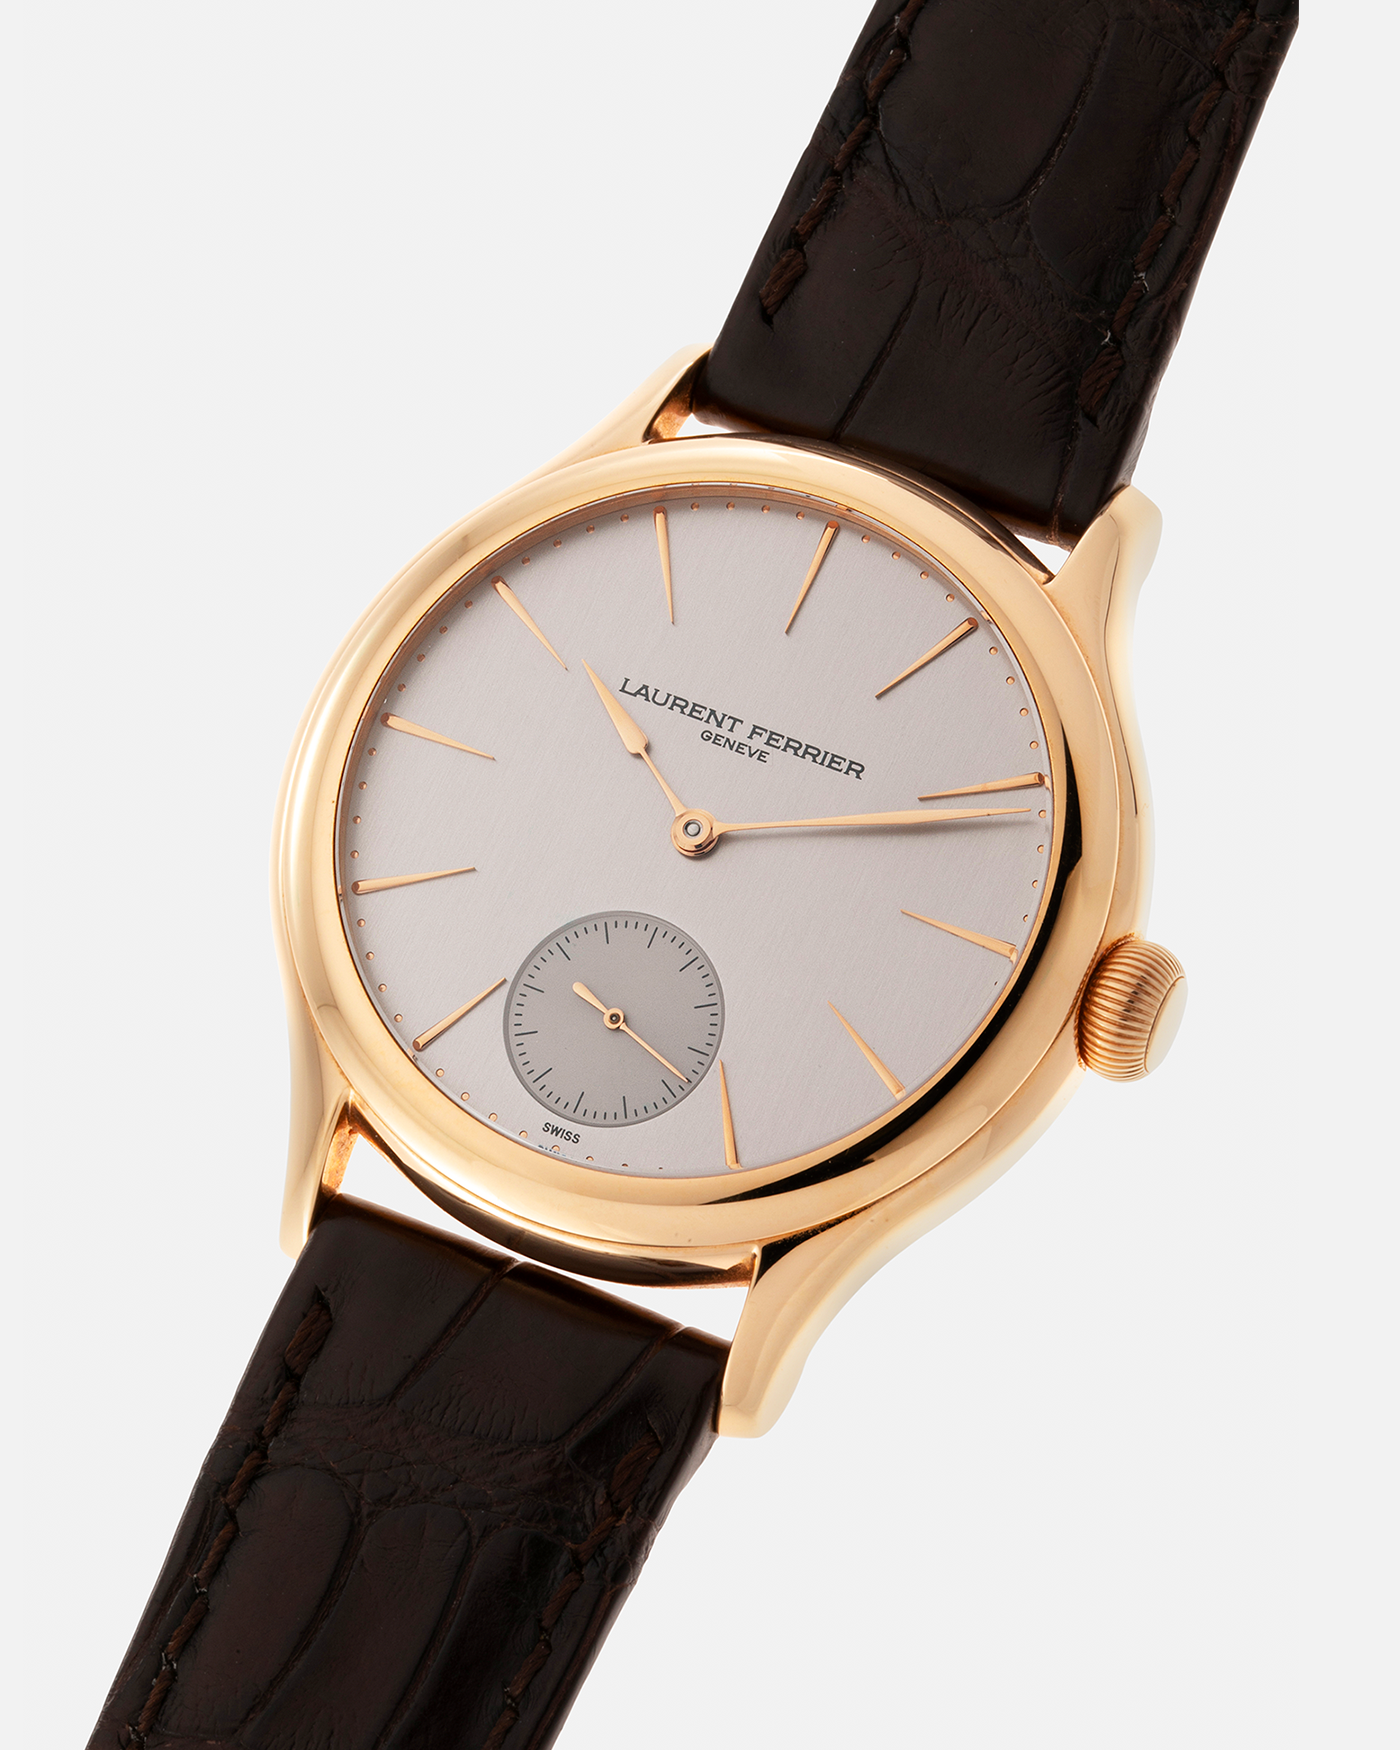 Brand: Laurent Ferrier Year: 2015 Model: Galet Classic Micro-Rotor Material: 18-carat Yellow Gold Movement: Cal. 229.01 Micro-Rotor, Self-Winding Case Diameter: 40mm Strap: Laurent Ferrier Brown Alligator Leather Strap with Signed 18-carat Rose Gold Tang Buckle